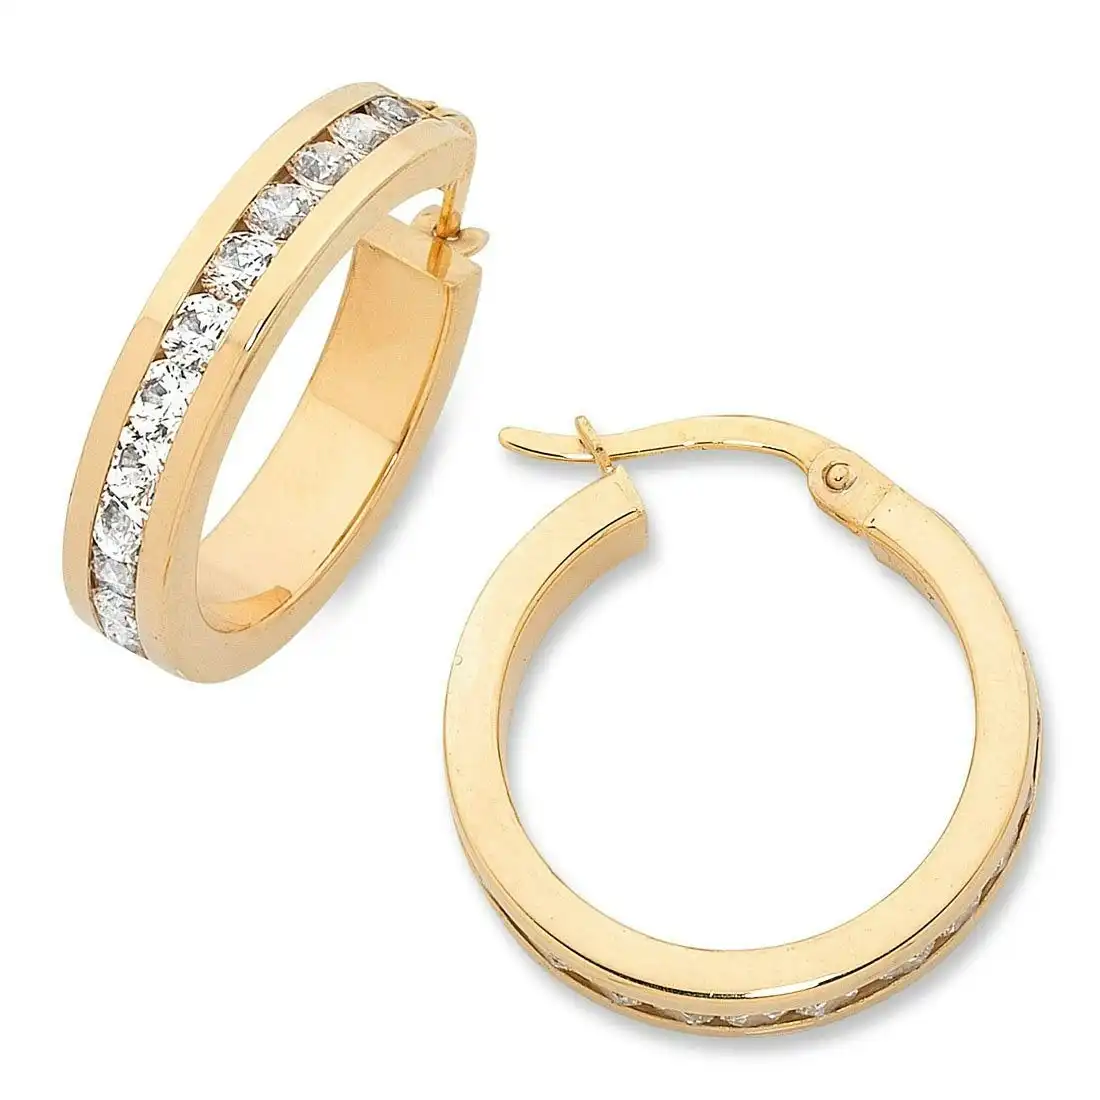 10mm Channel Cubic Zirconia Hoop Earrings in 9ct Yellow Gold Silver Infused